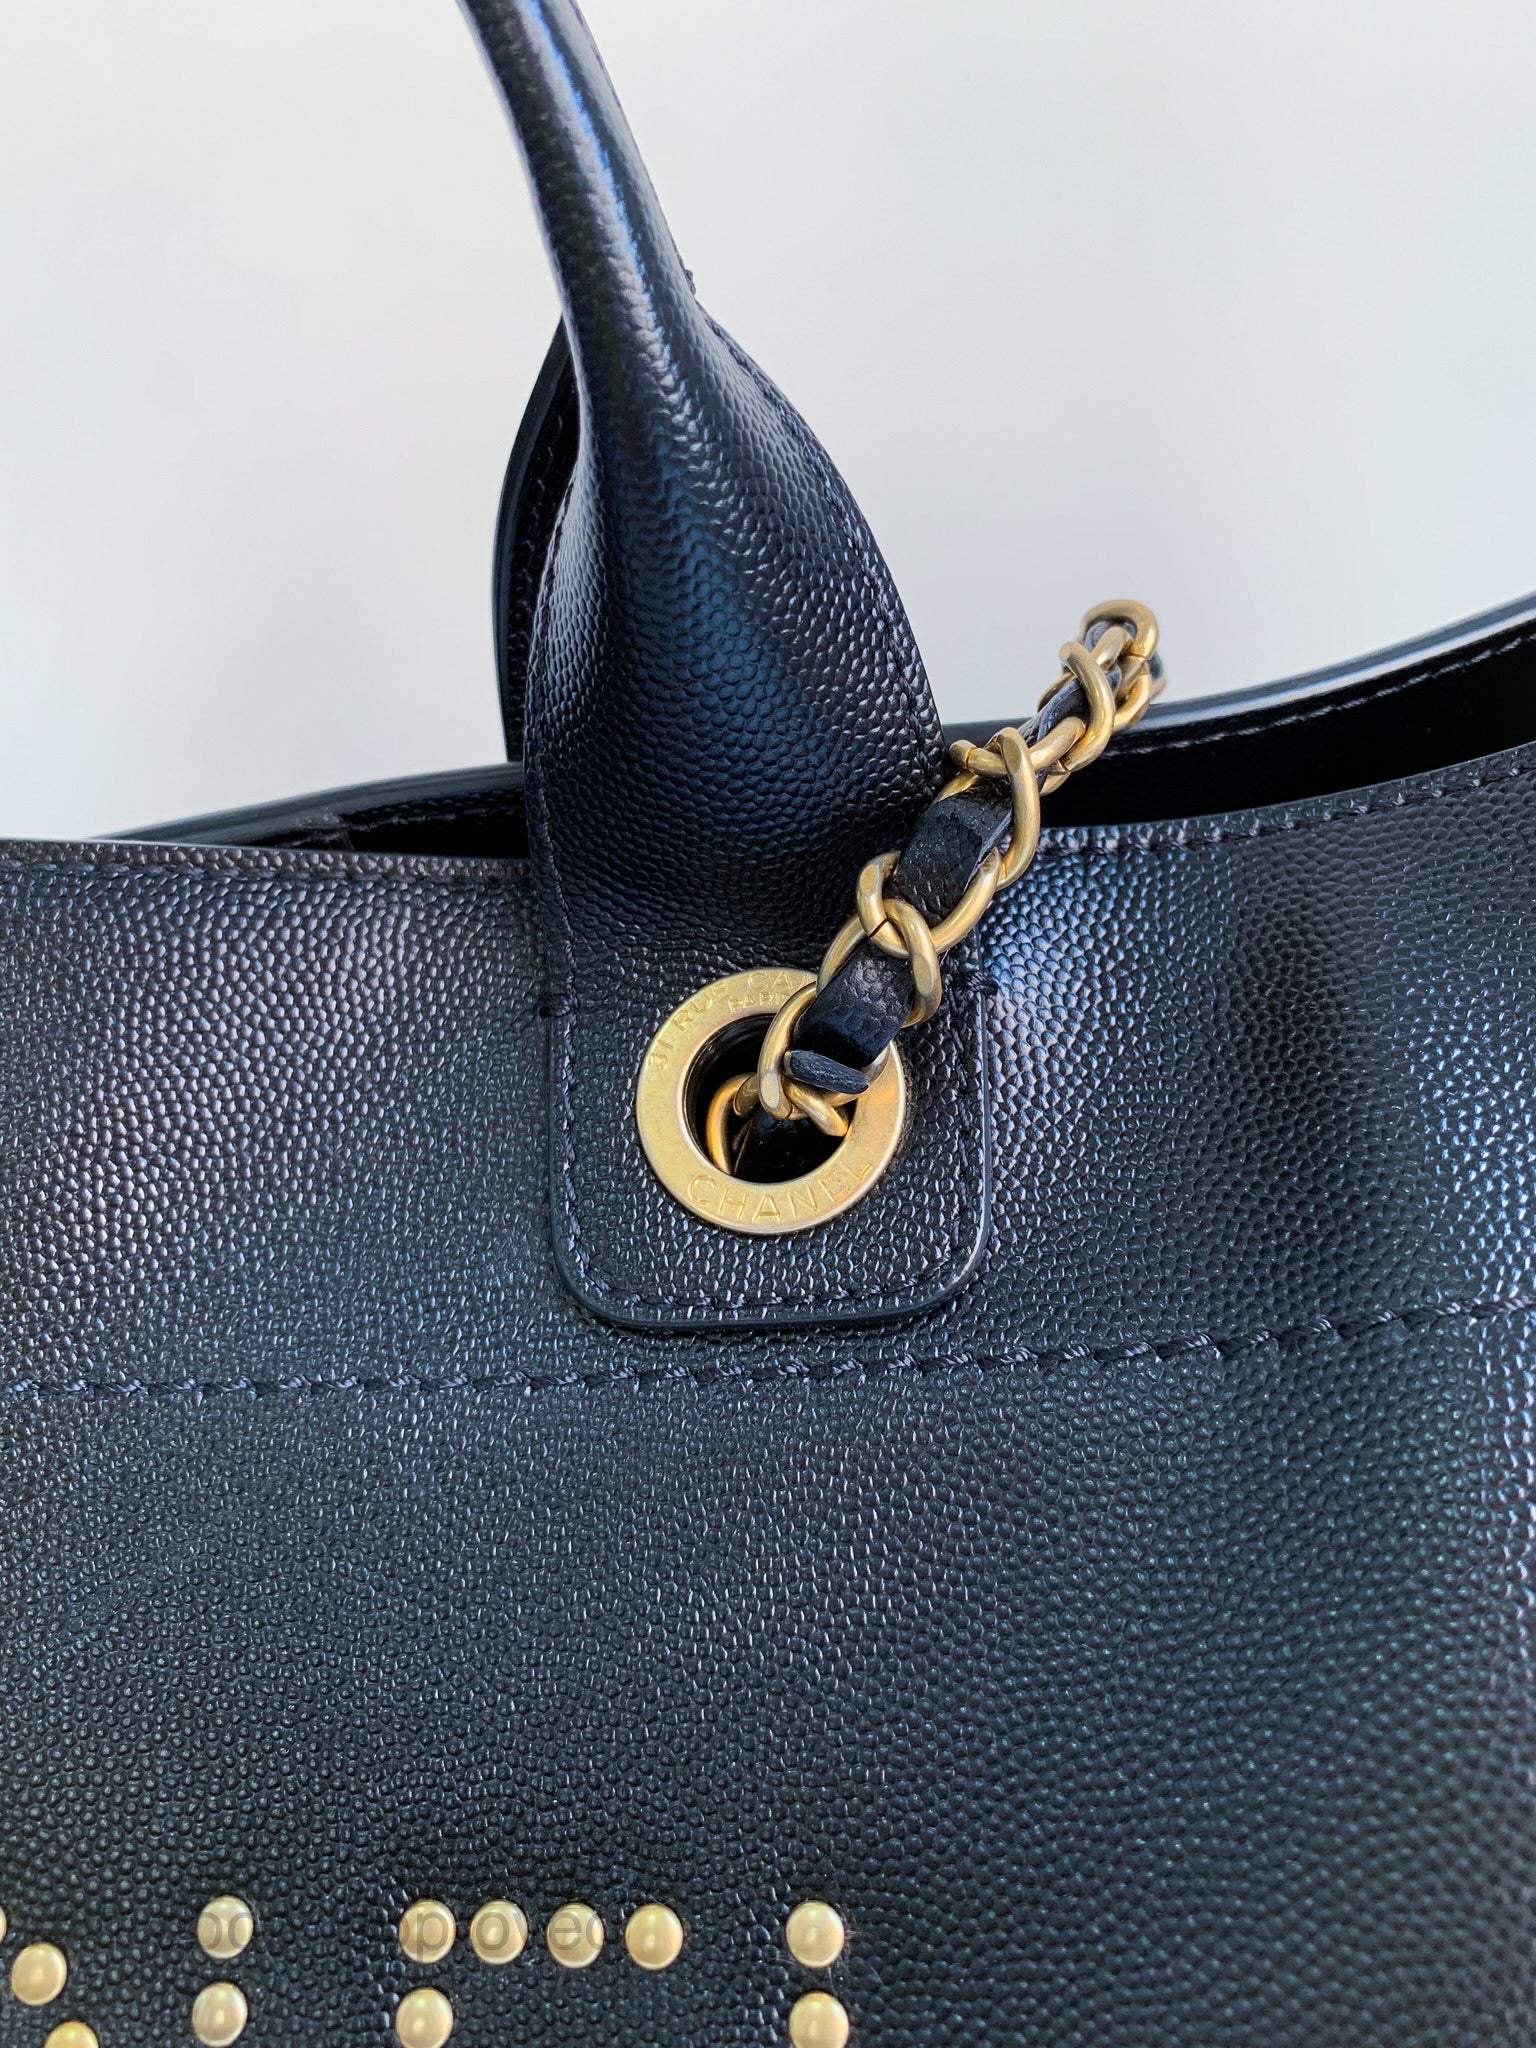 CHANEL Deauville Tote Medium Black Caviar Brushed Gold Hardware